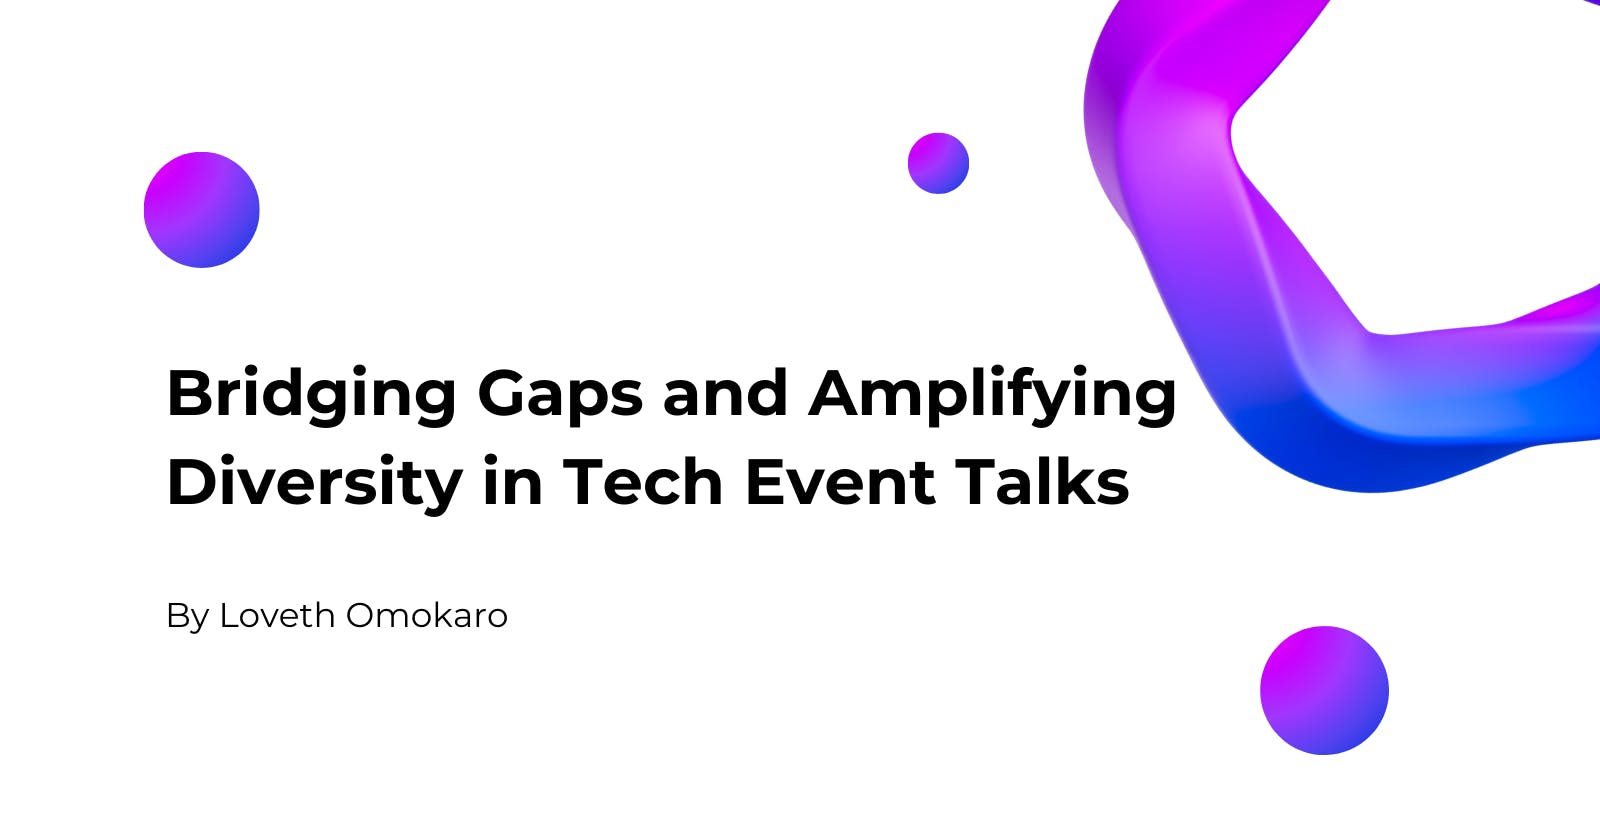 Bridging Gaps and Amplifying Diversity in Tech Event Talks